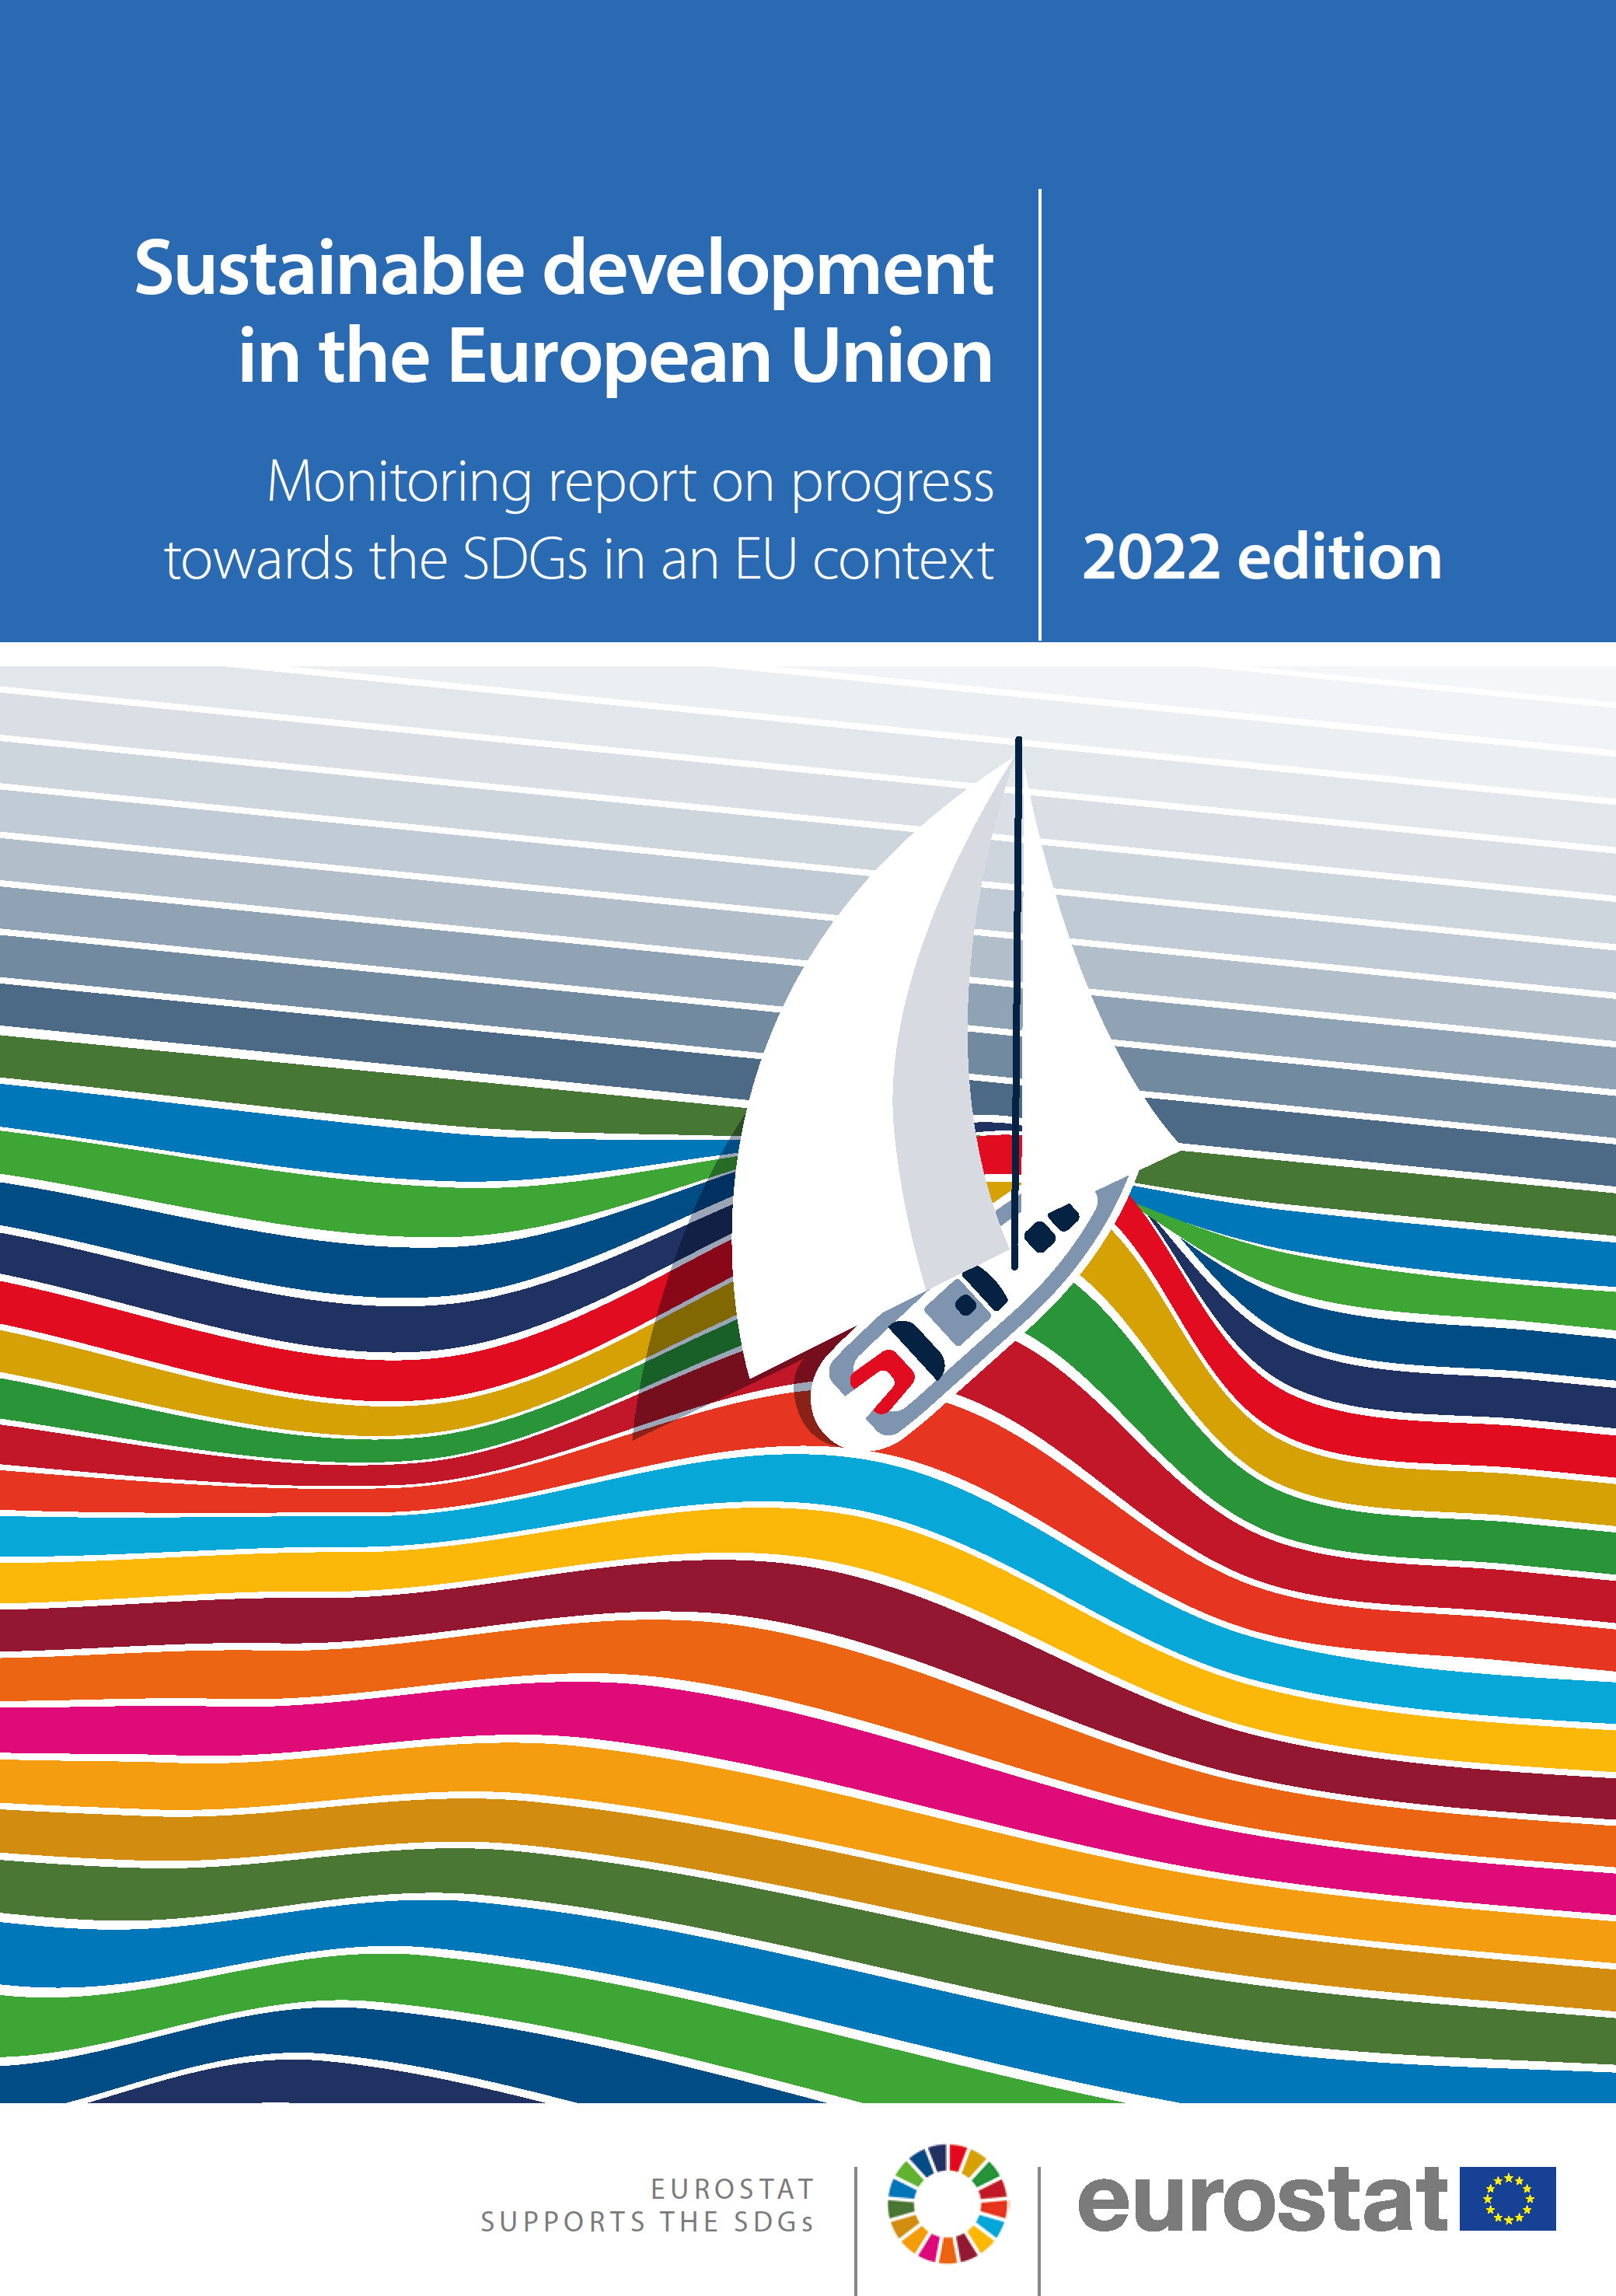 Sustainable development in the European Union -Overview of progress towards the SDGs in an EU context - 2022 edition